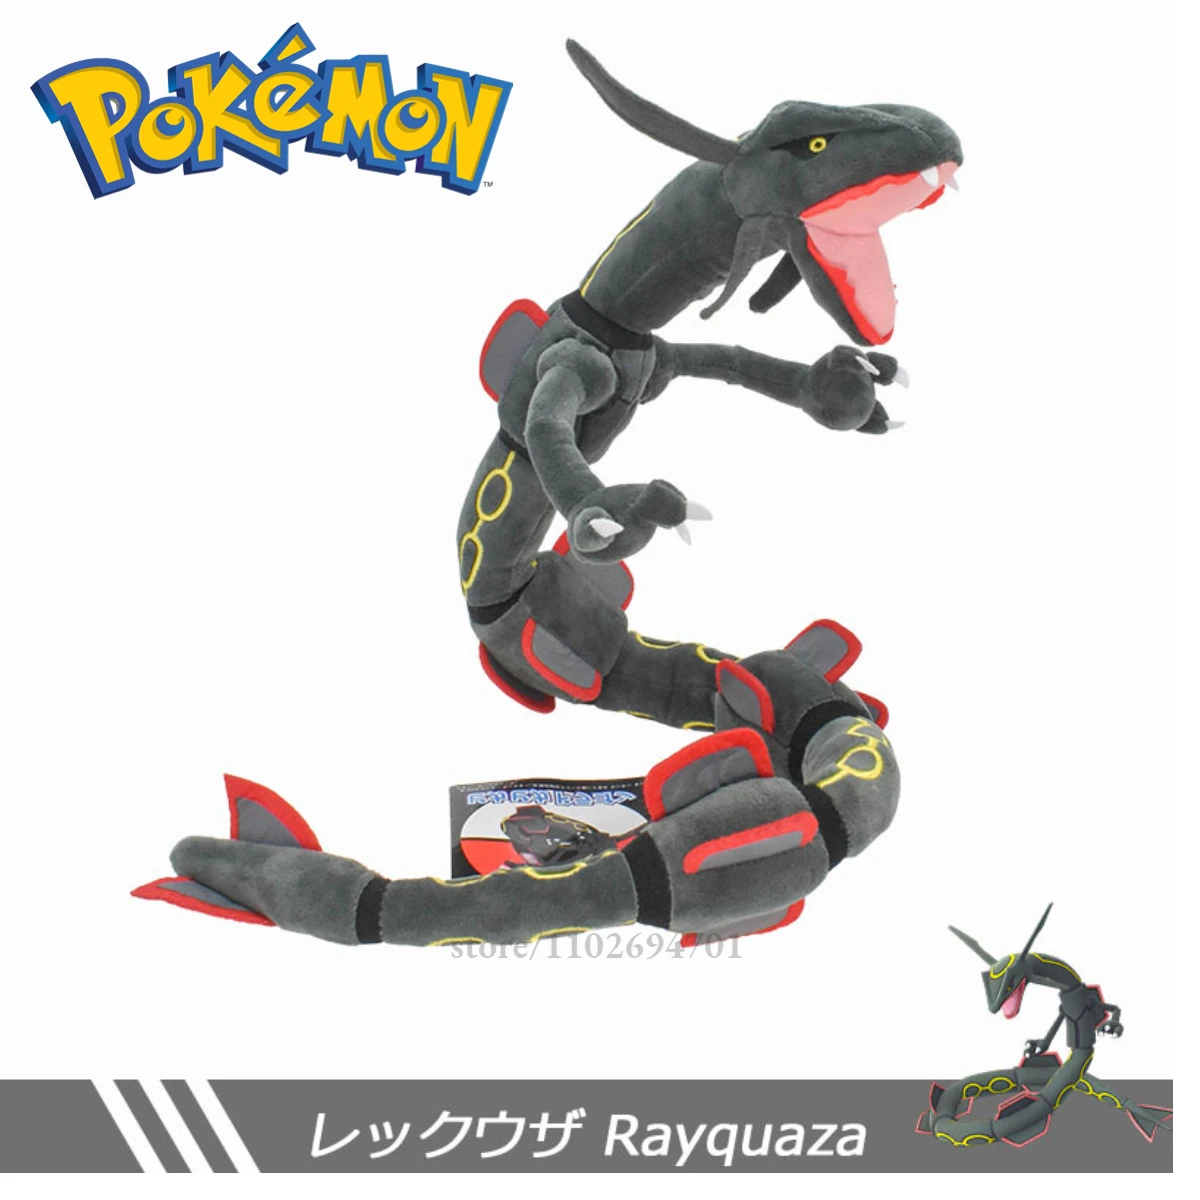 

Pokemon Go Dragon Rayquaza Plush Dolls Pocket Monsters 75cm Plushies Collection Soft Stuffed Animals Kid Toy for Boy Girl